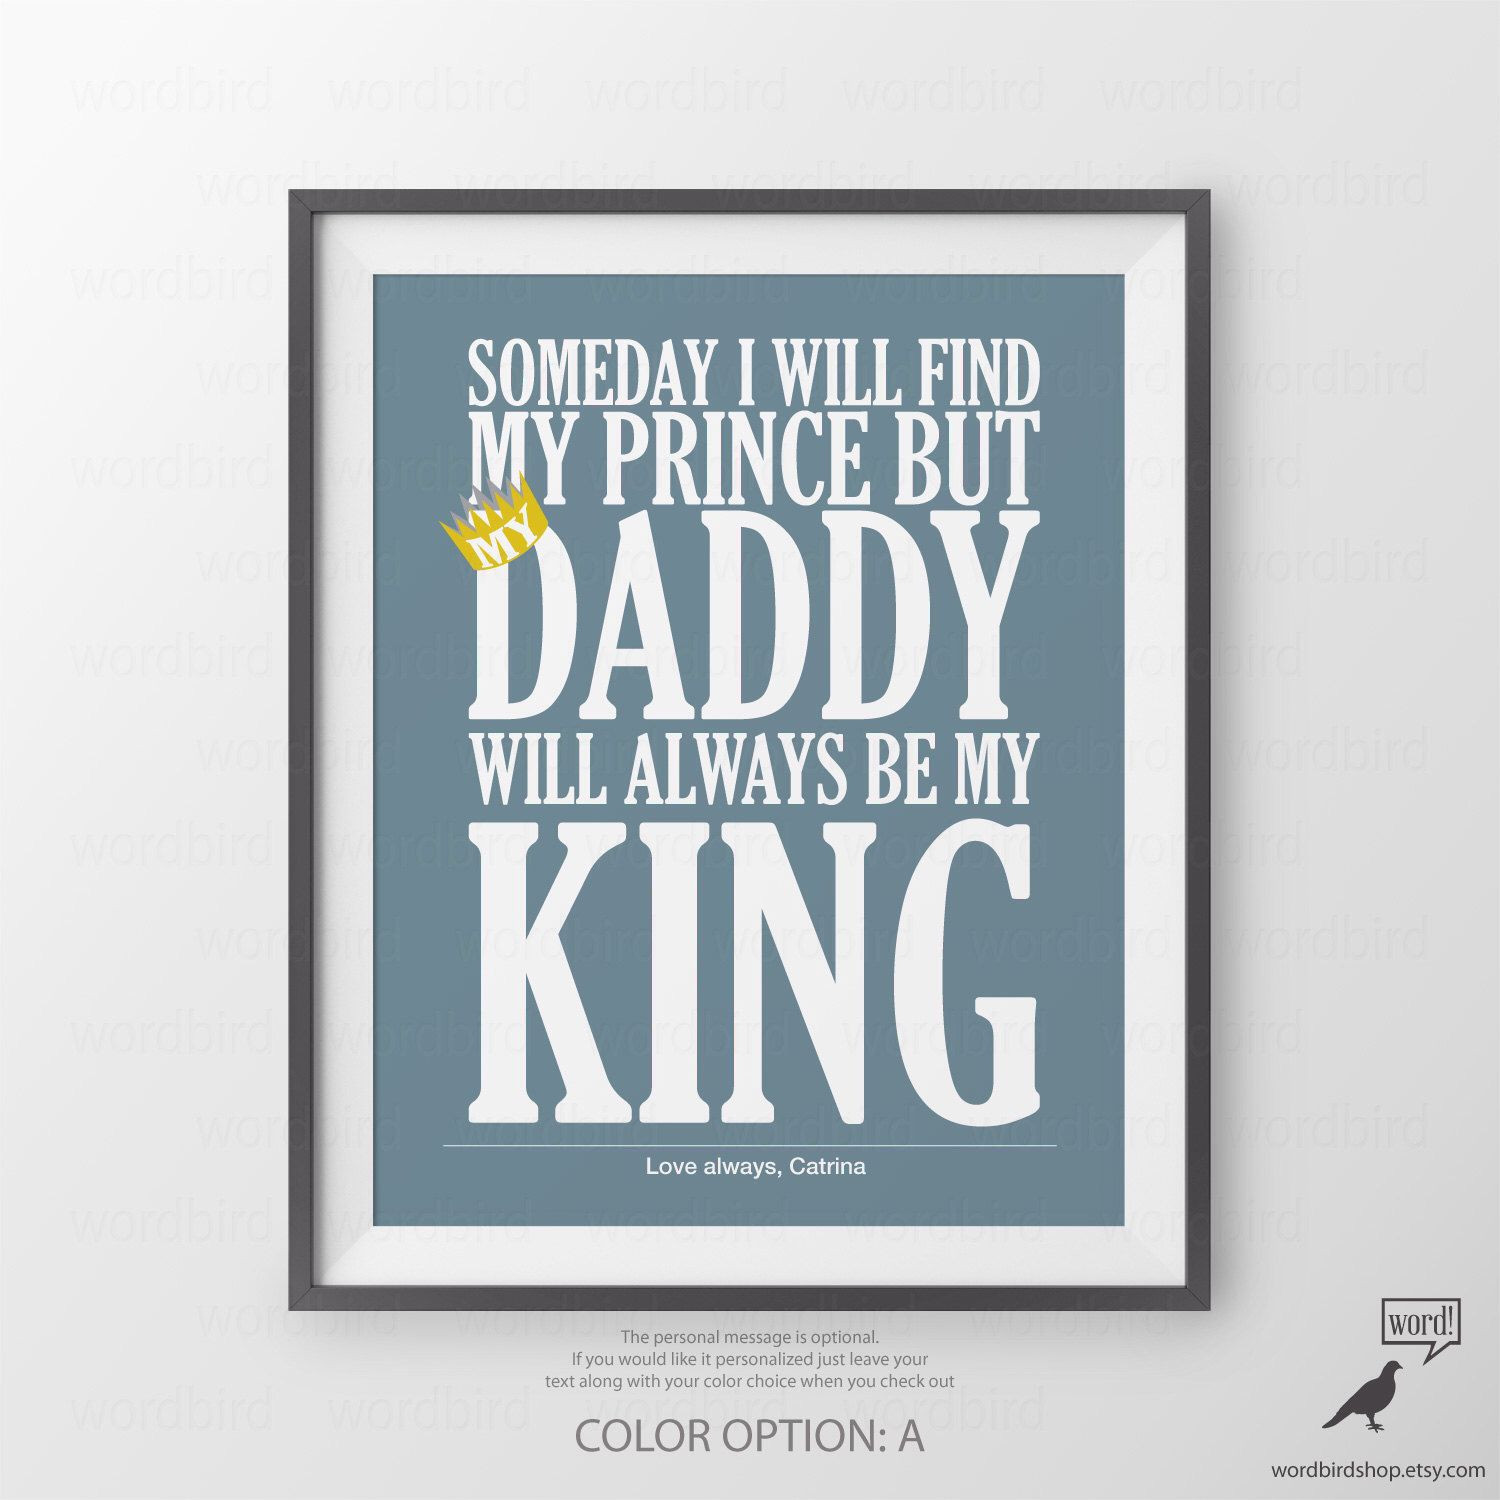 Birthday Gift Ideas For Dad From Daughter
 Personalized Christmas Gift for Dad Birthday Gift from